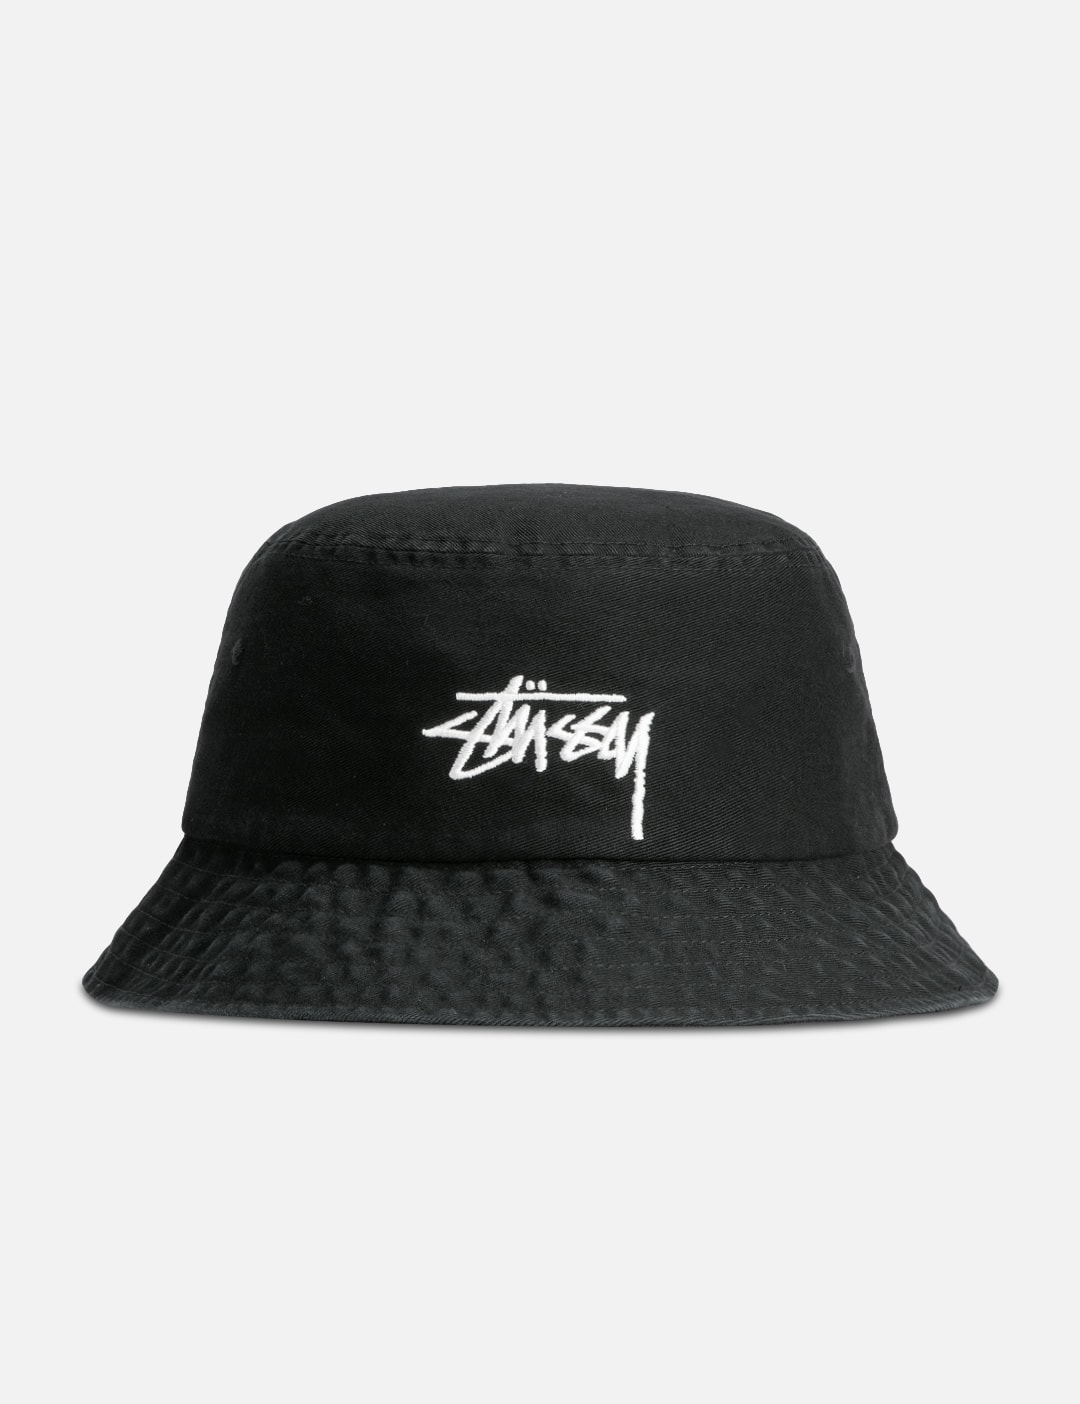 Stüssy - Big Stock Bucket Hat | HBX - Globally Curated Fashion and ...